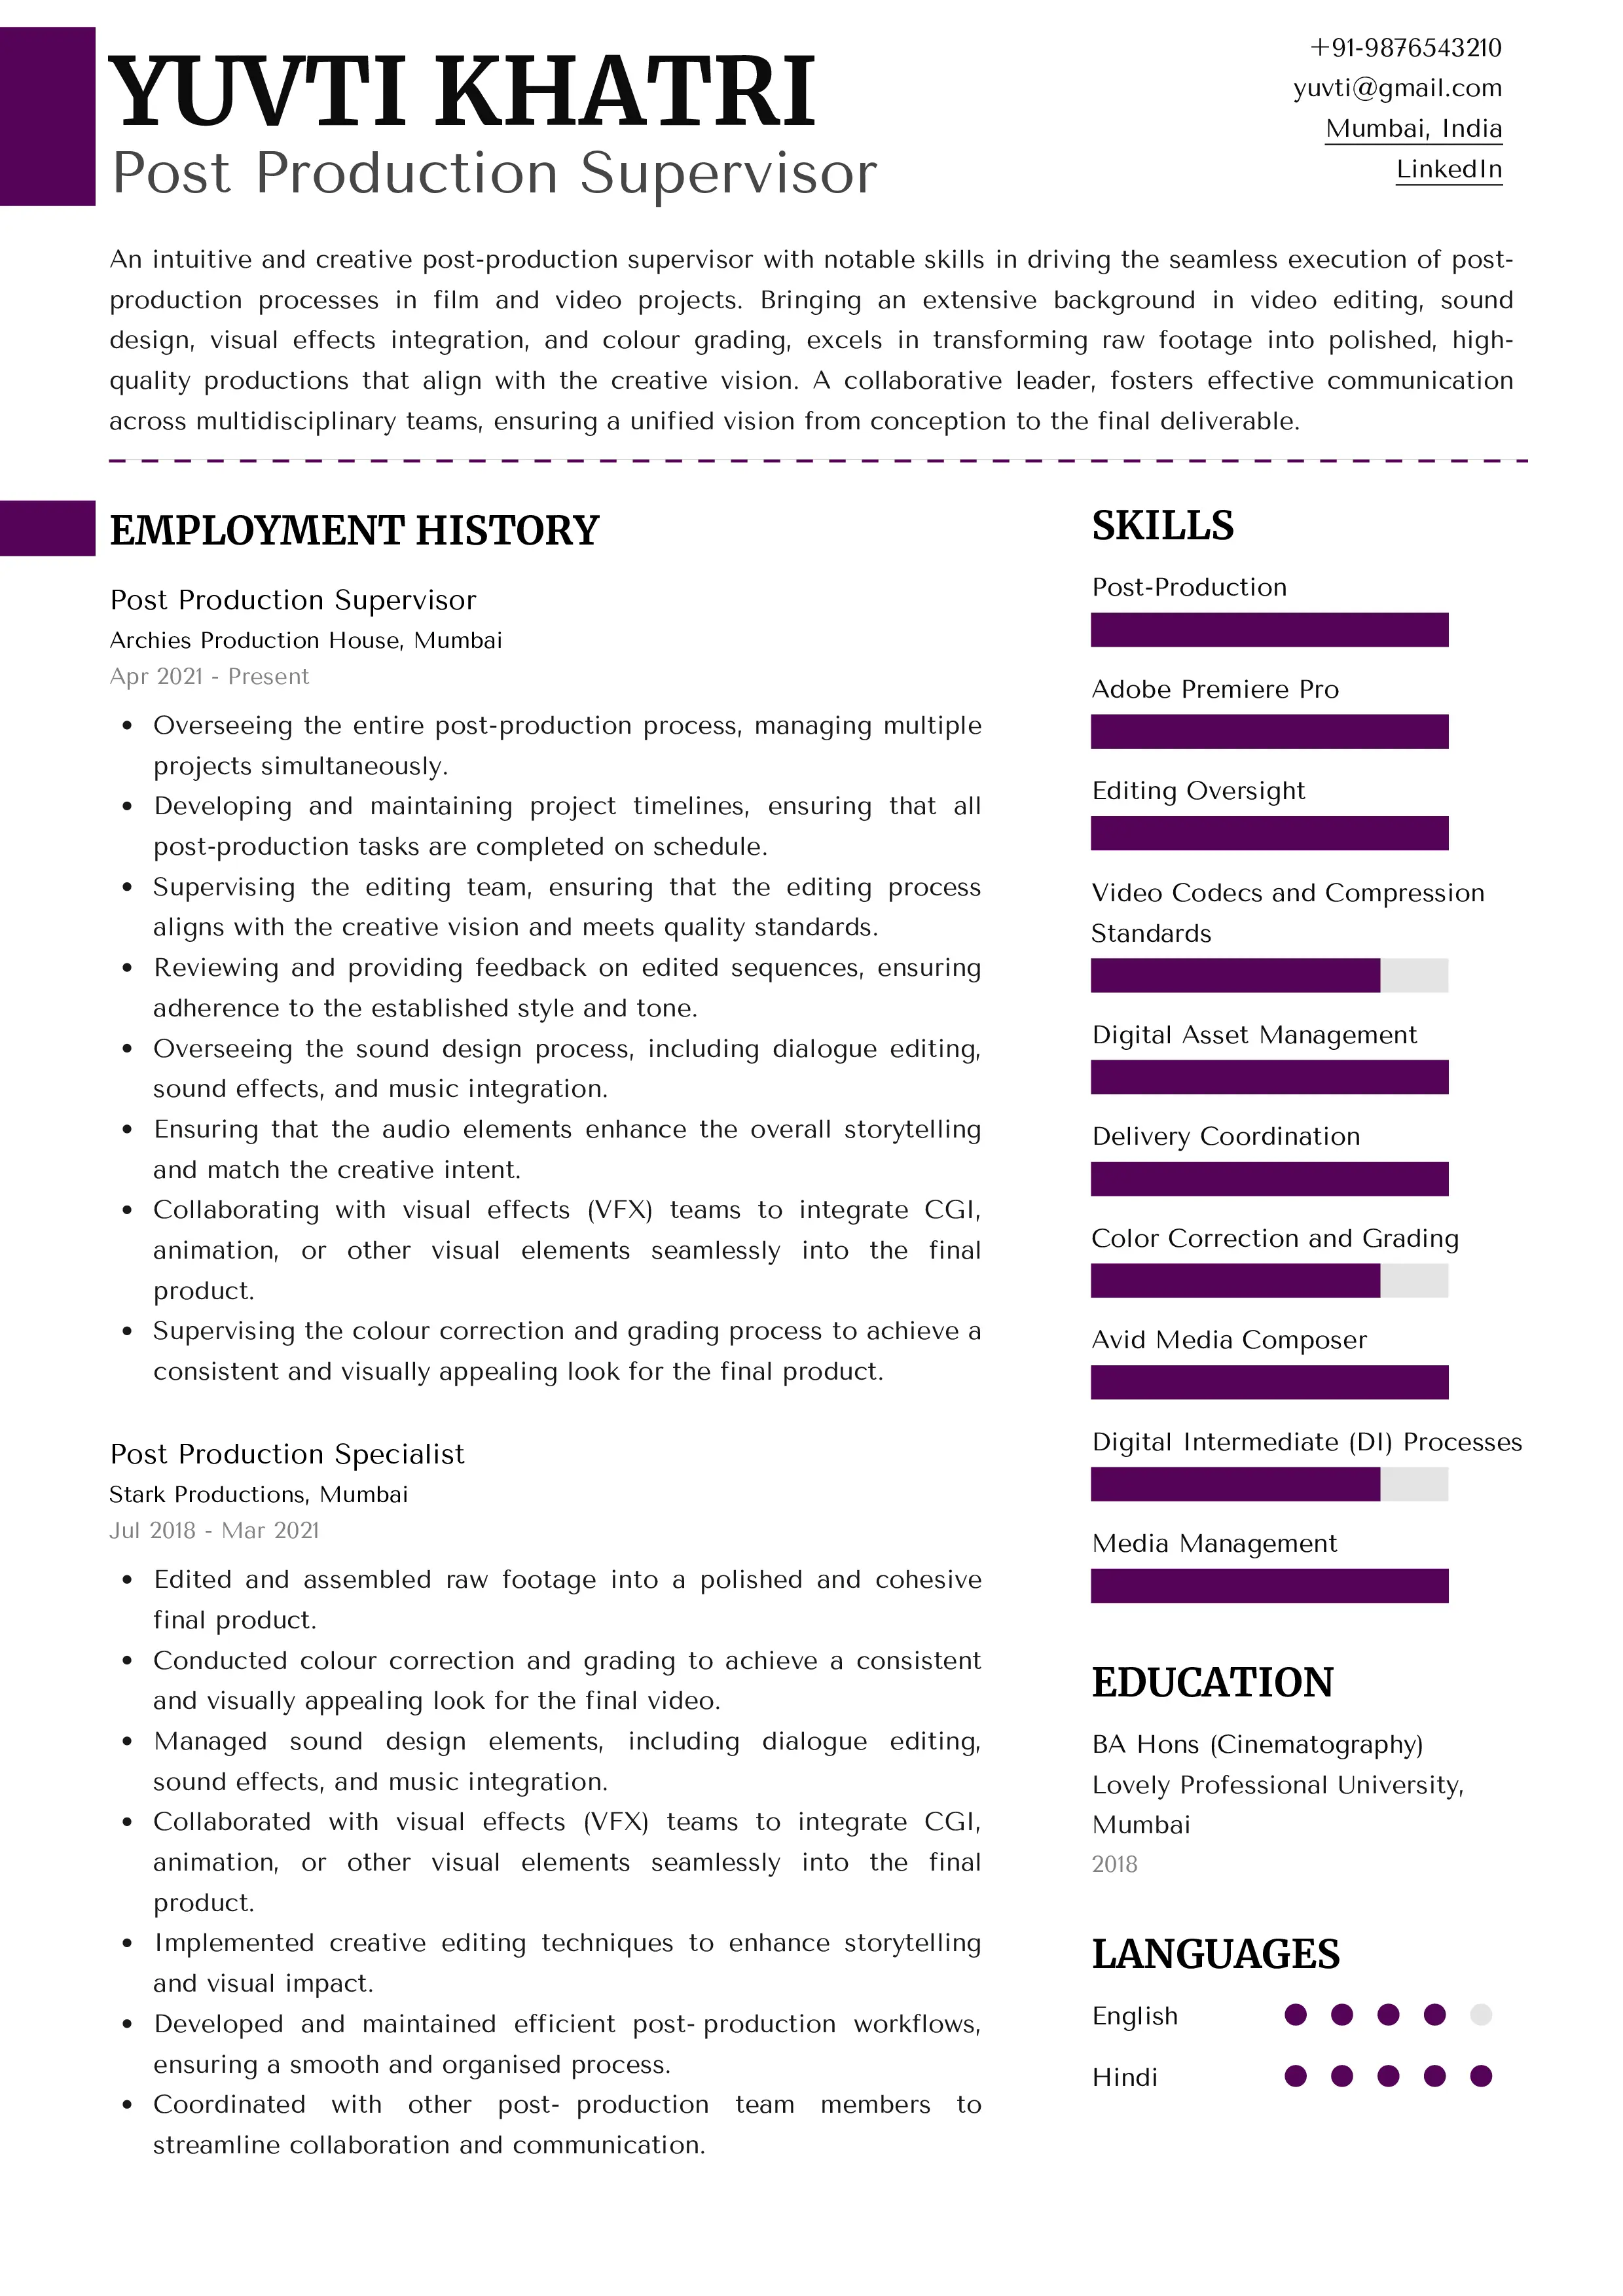 Sample Resume of Post Production Supervisor | Free Resume Templates & Samples on Resumod.co